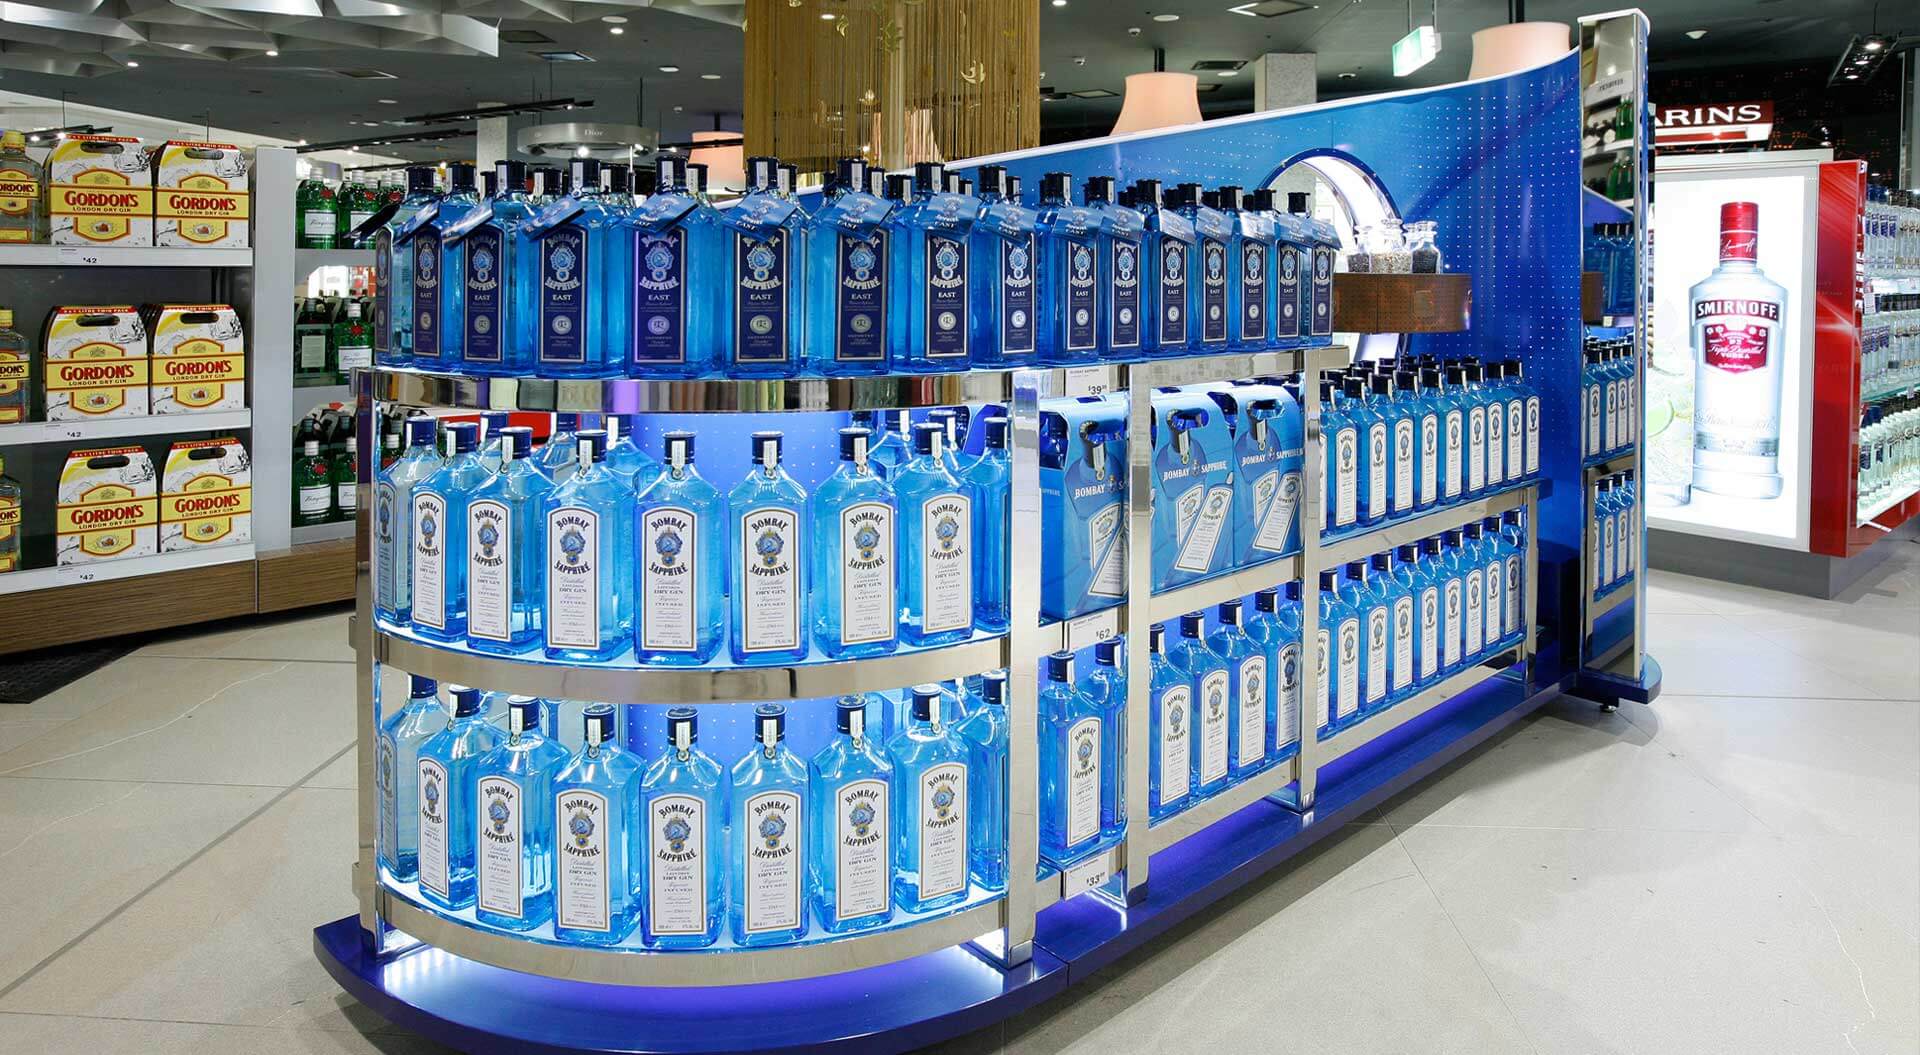 Bacardi Bombay Sapphire spirits industry promotion merchandising systems design at Sydney airport for duty free travel retail